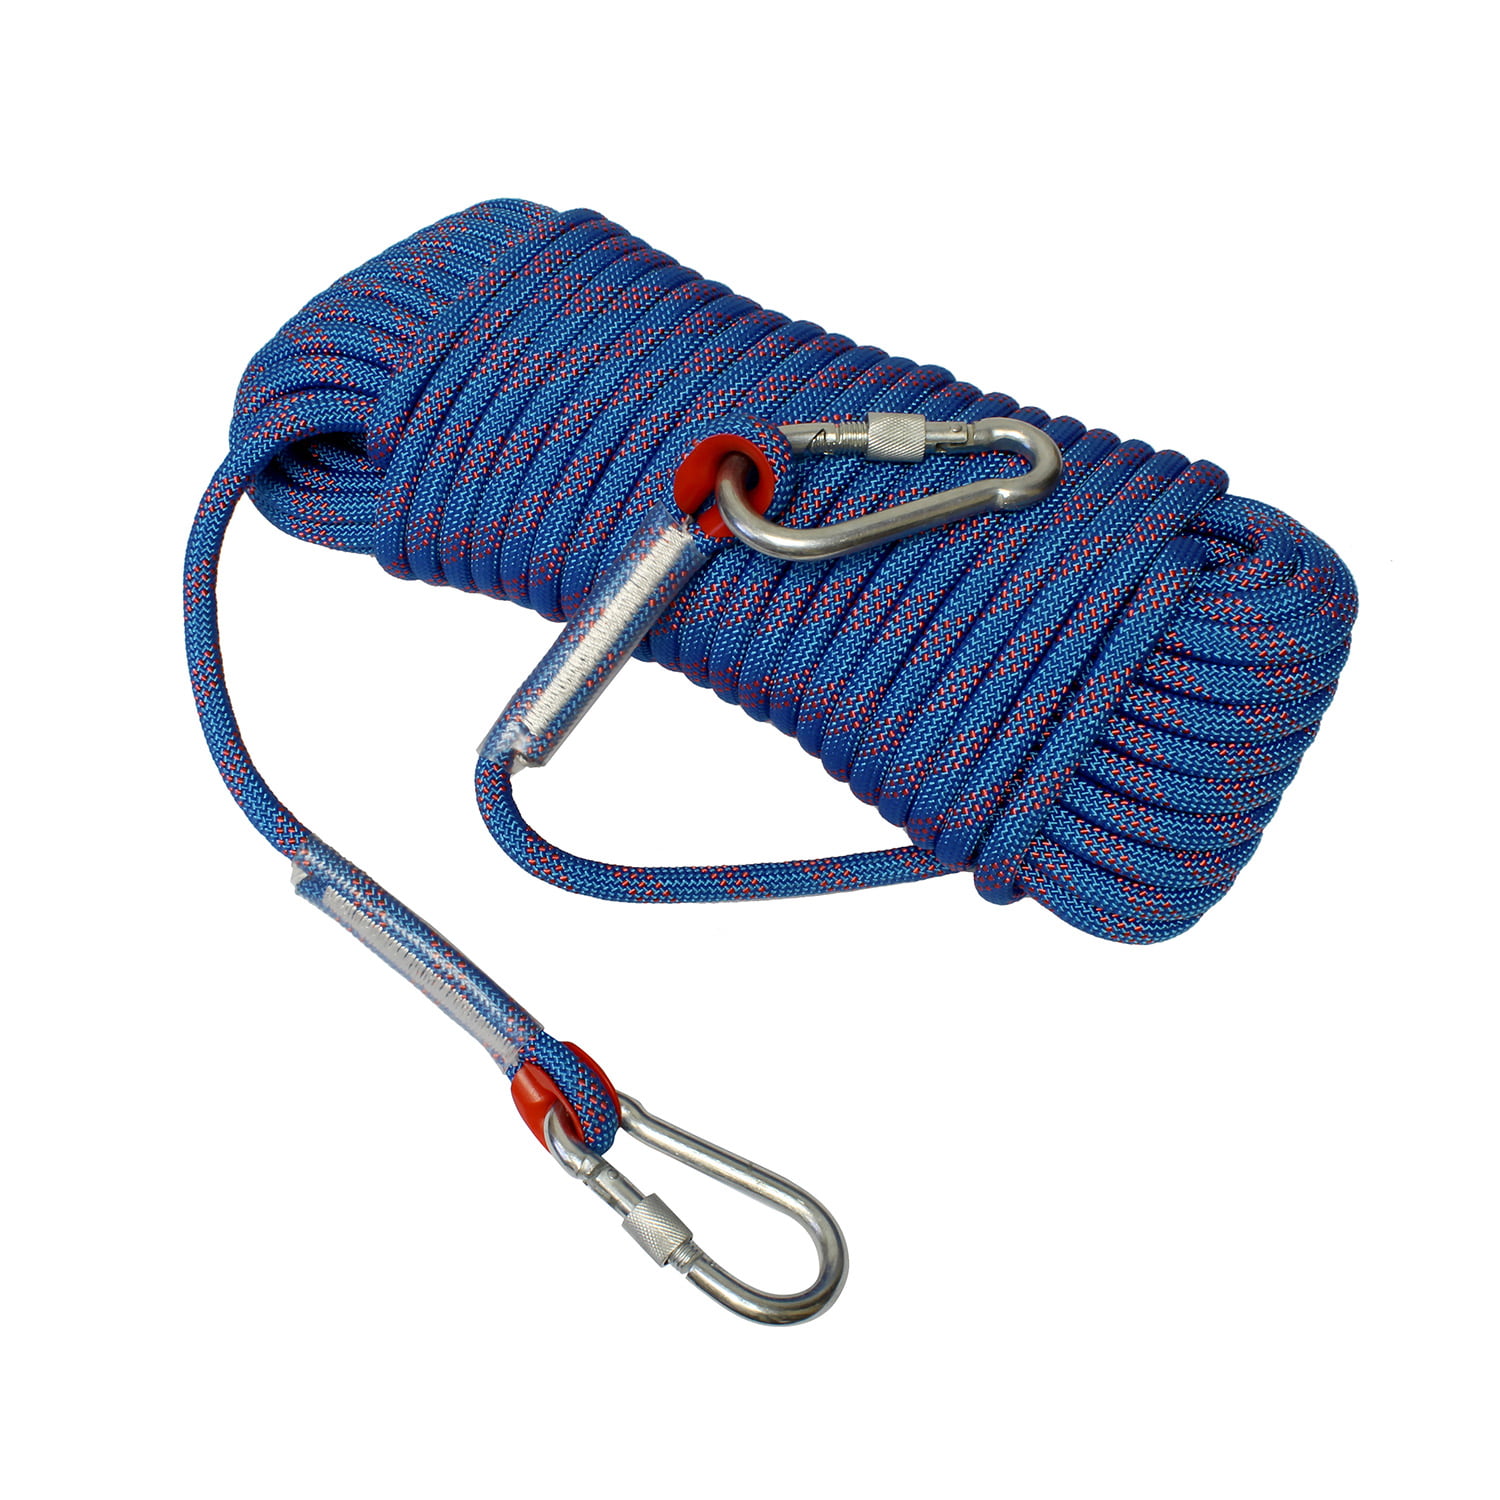 Emergency Rappelling Rock Climbing Rope Strap with Glove and Carabiners Tool Kit